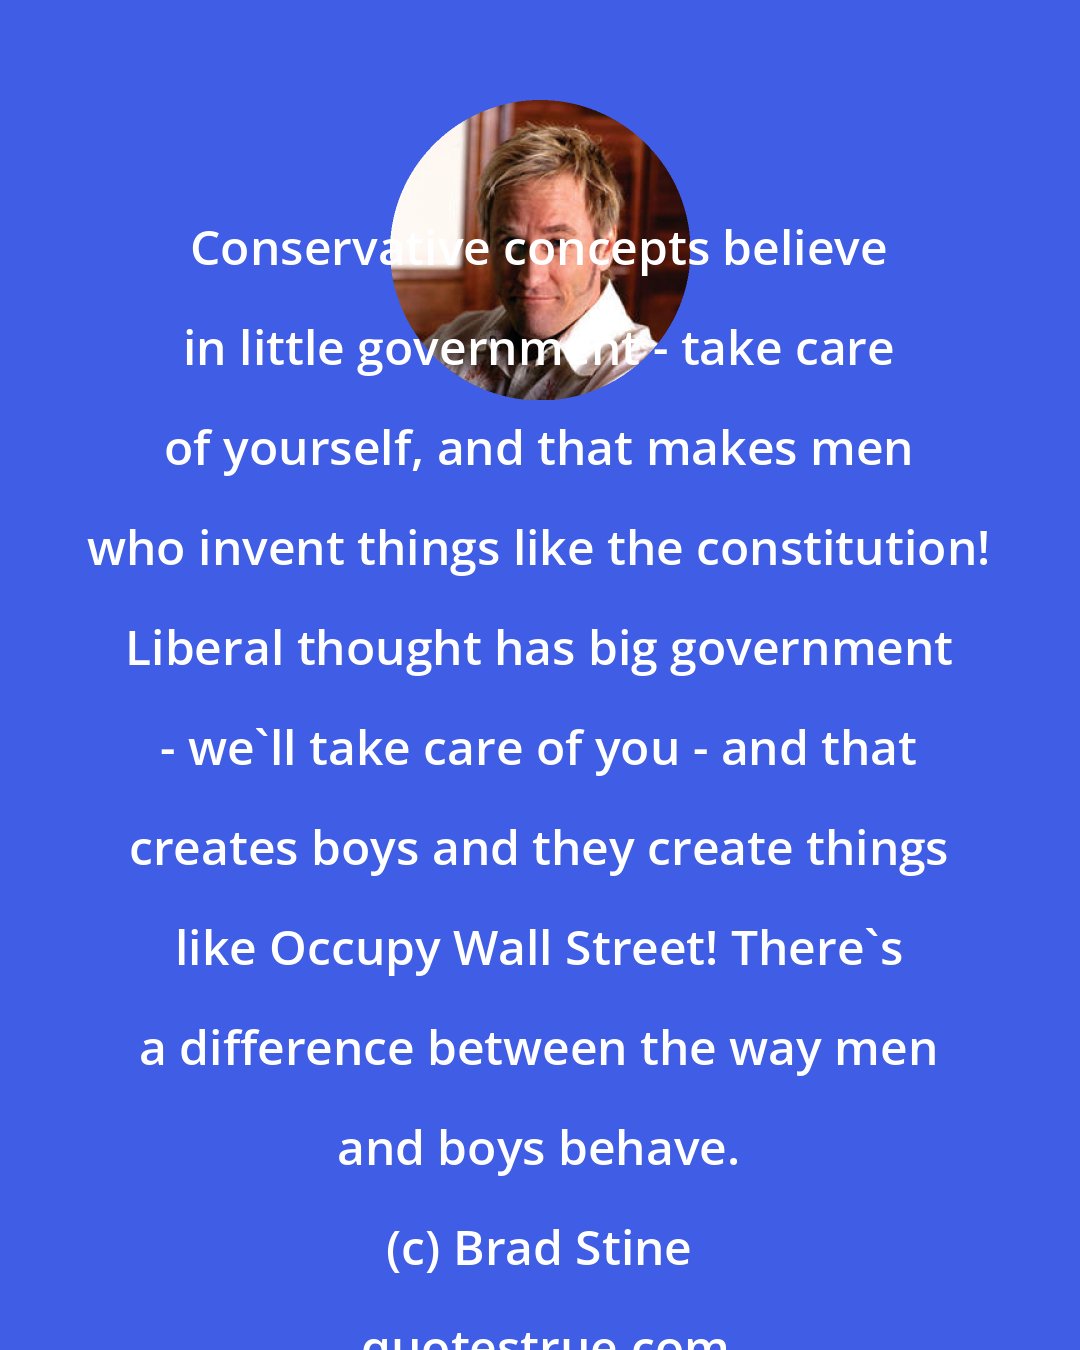 Brad Stine: Conservative concepts believe in little government - take care of yourself, and that makes men who invent things like the constitution! Liberal thought has big government - we'll take care of you - and that creates boys and they create things like Occupy Wall Street! There's a difference between the way men and boys behave.